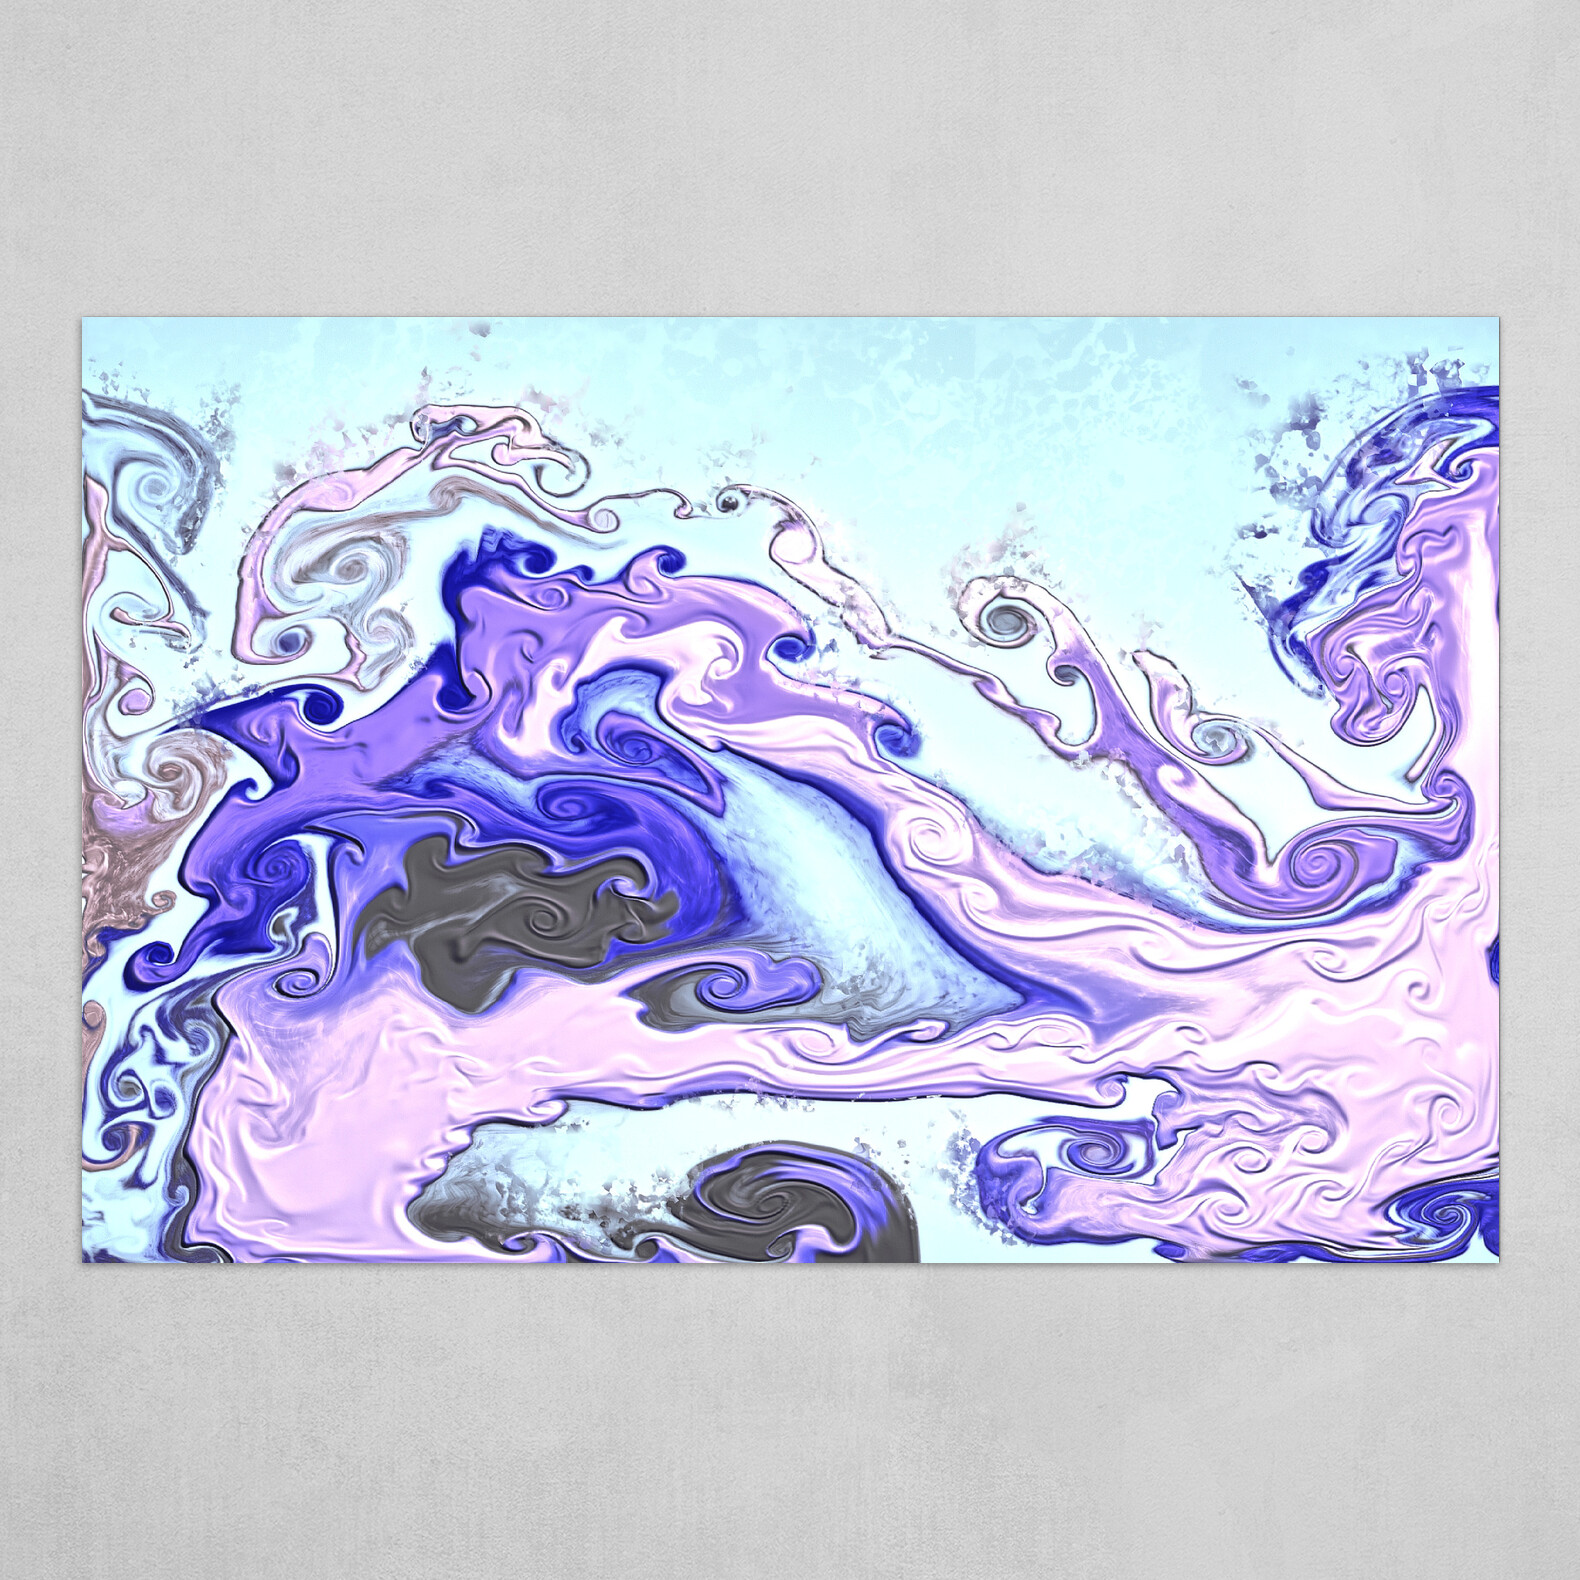 Purple and light blue fluid pour abstract art 4